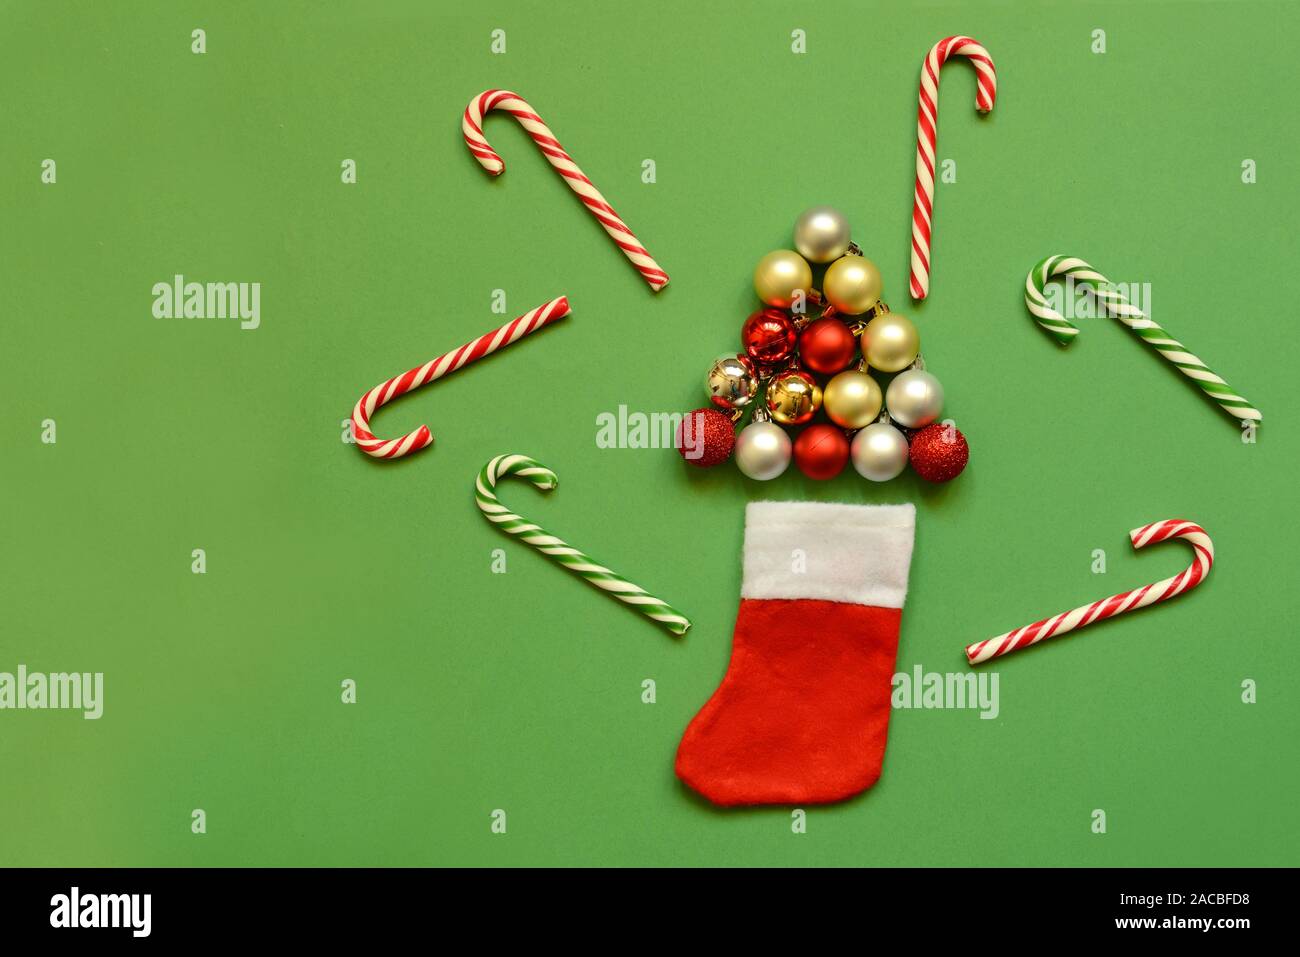 Trendy creative Santa Claus socks with various Christmas objects Stock Photo